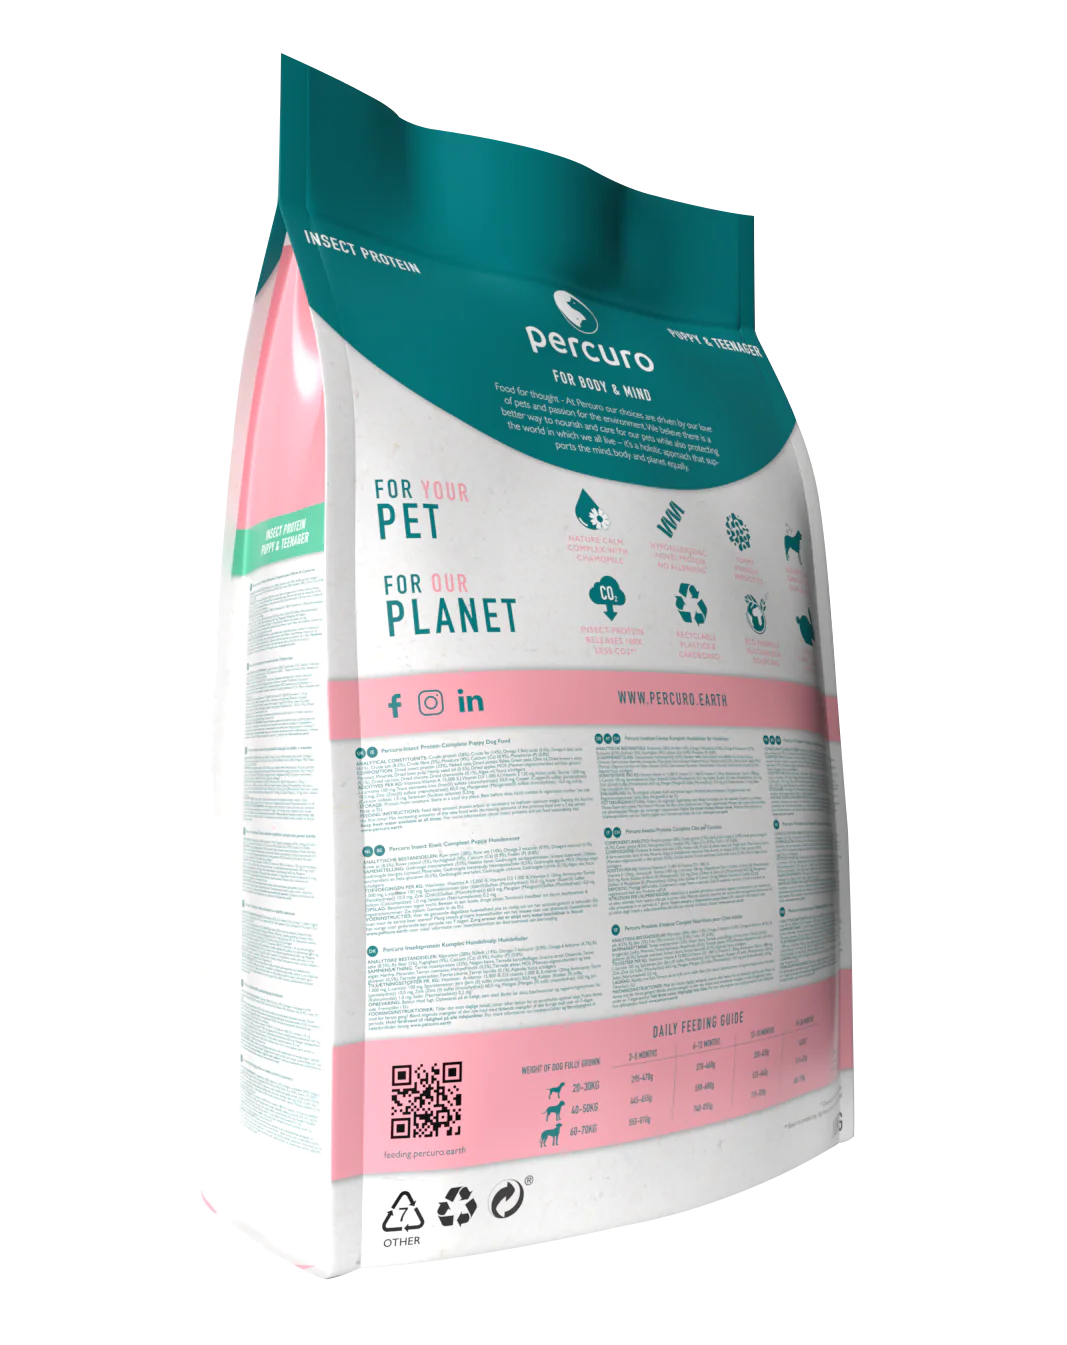 Percuro Insect Protein Puppy Large Breed Dry Dog Food 10KG